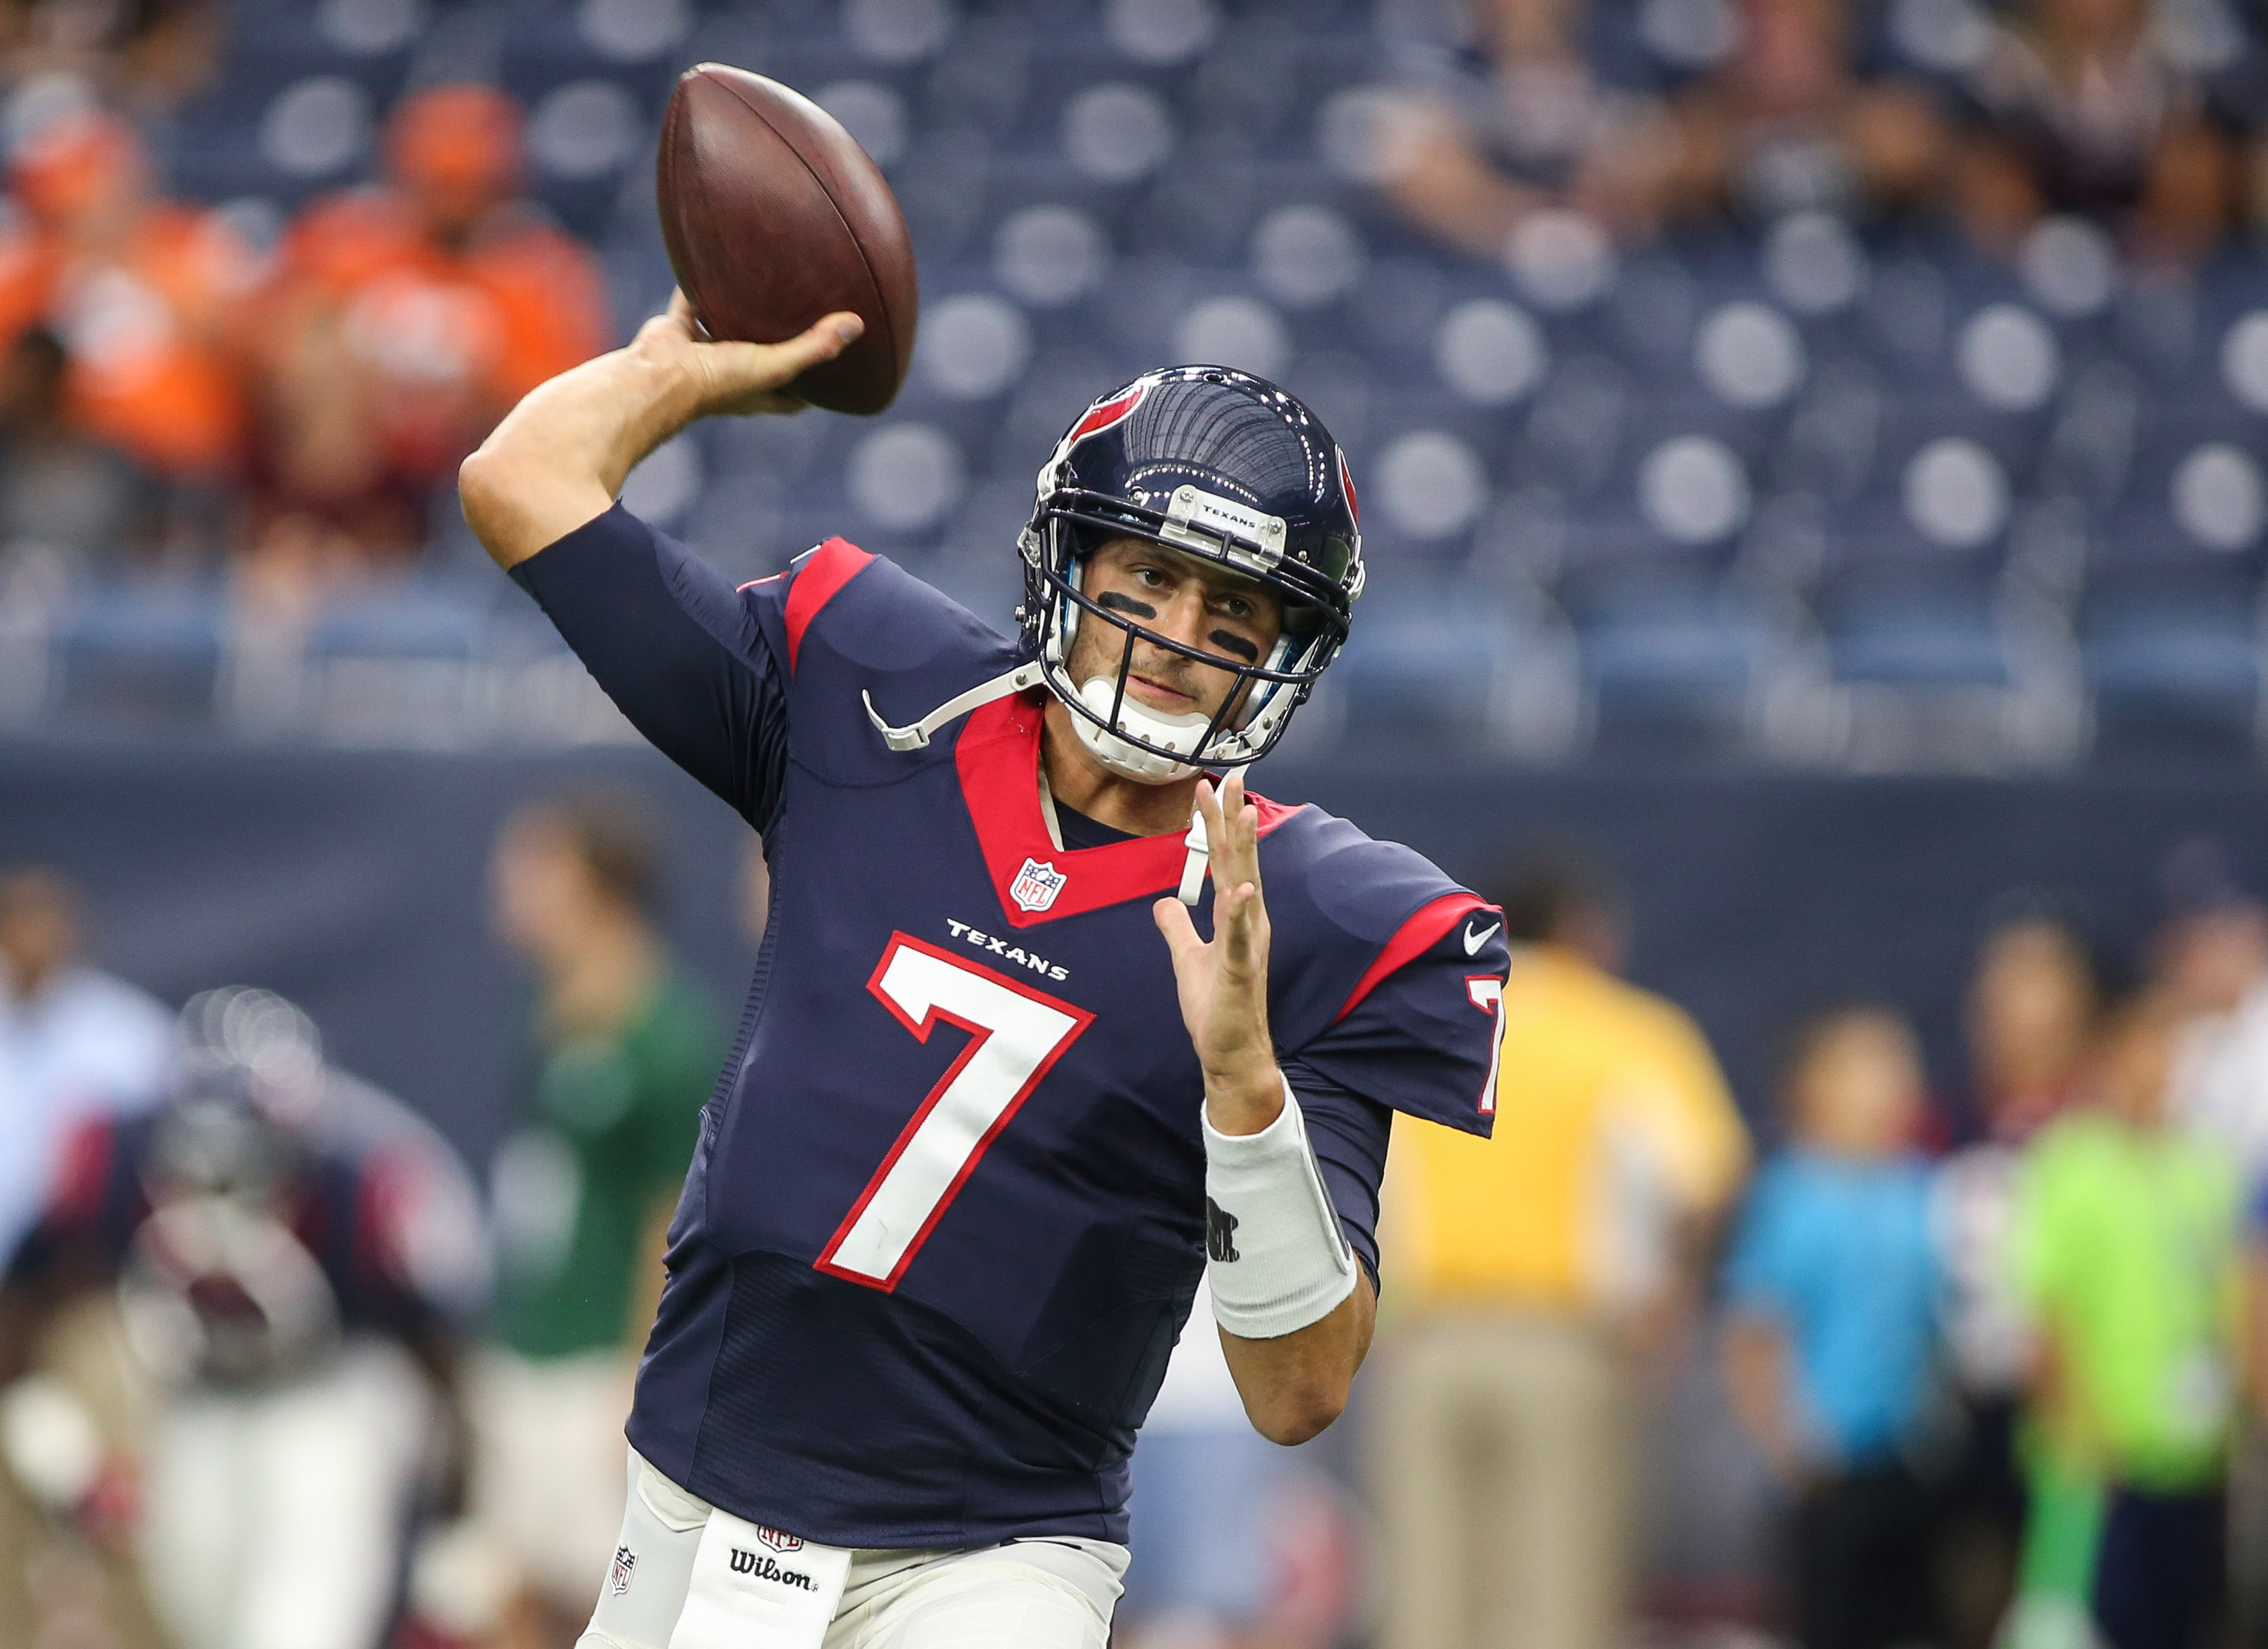 It's official: Hoyer named starting QB for Texans